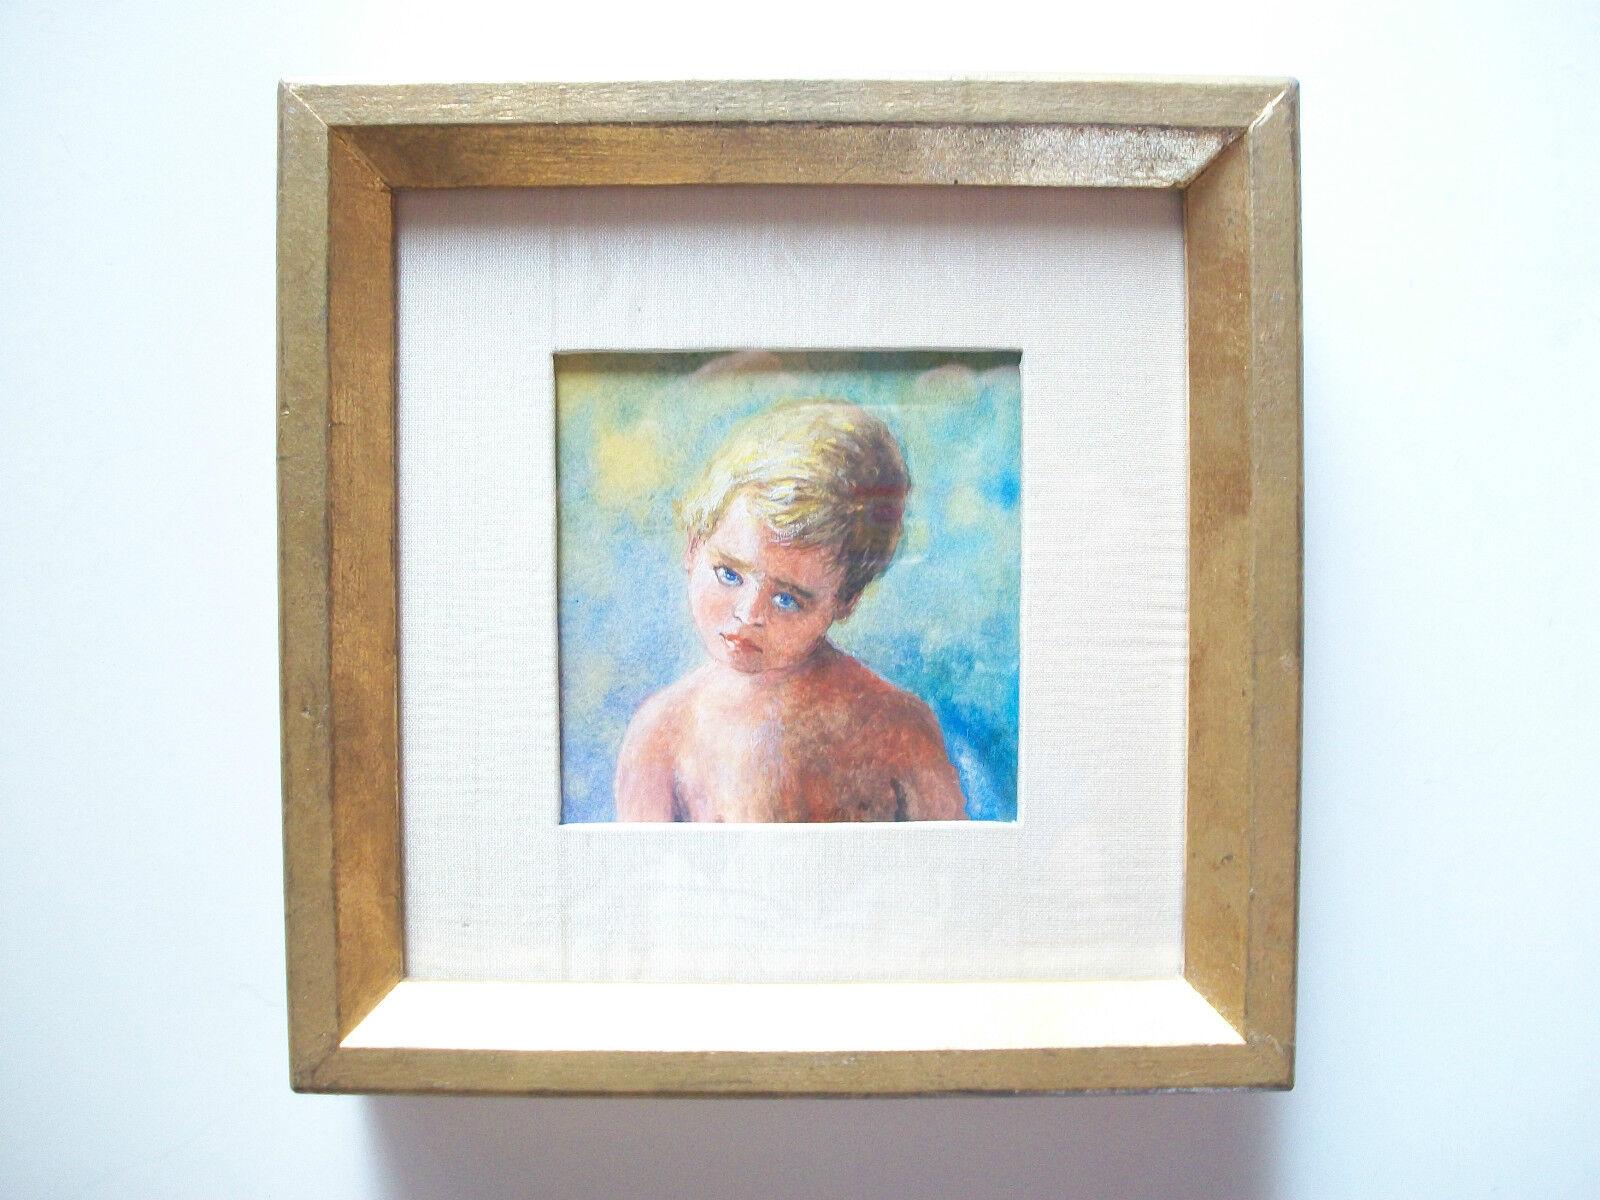 Contemporary watercolor portrait of a young boy - unsigned - custom silk matte and gilt frame with glass - hanger to the back - Canada - late 20th century.

Excellent condition - bright and strong color - silk matte with a few ripples - ready to